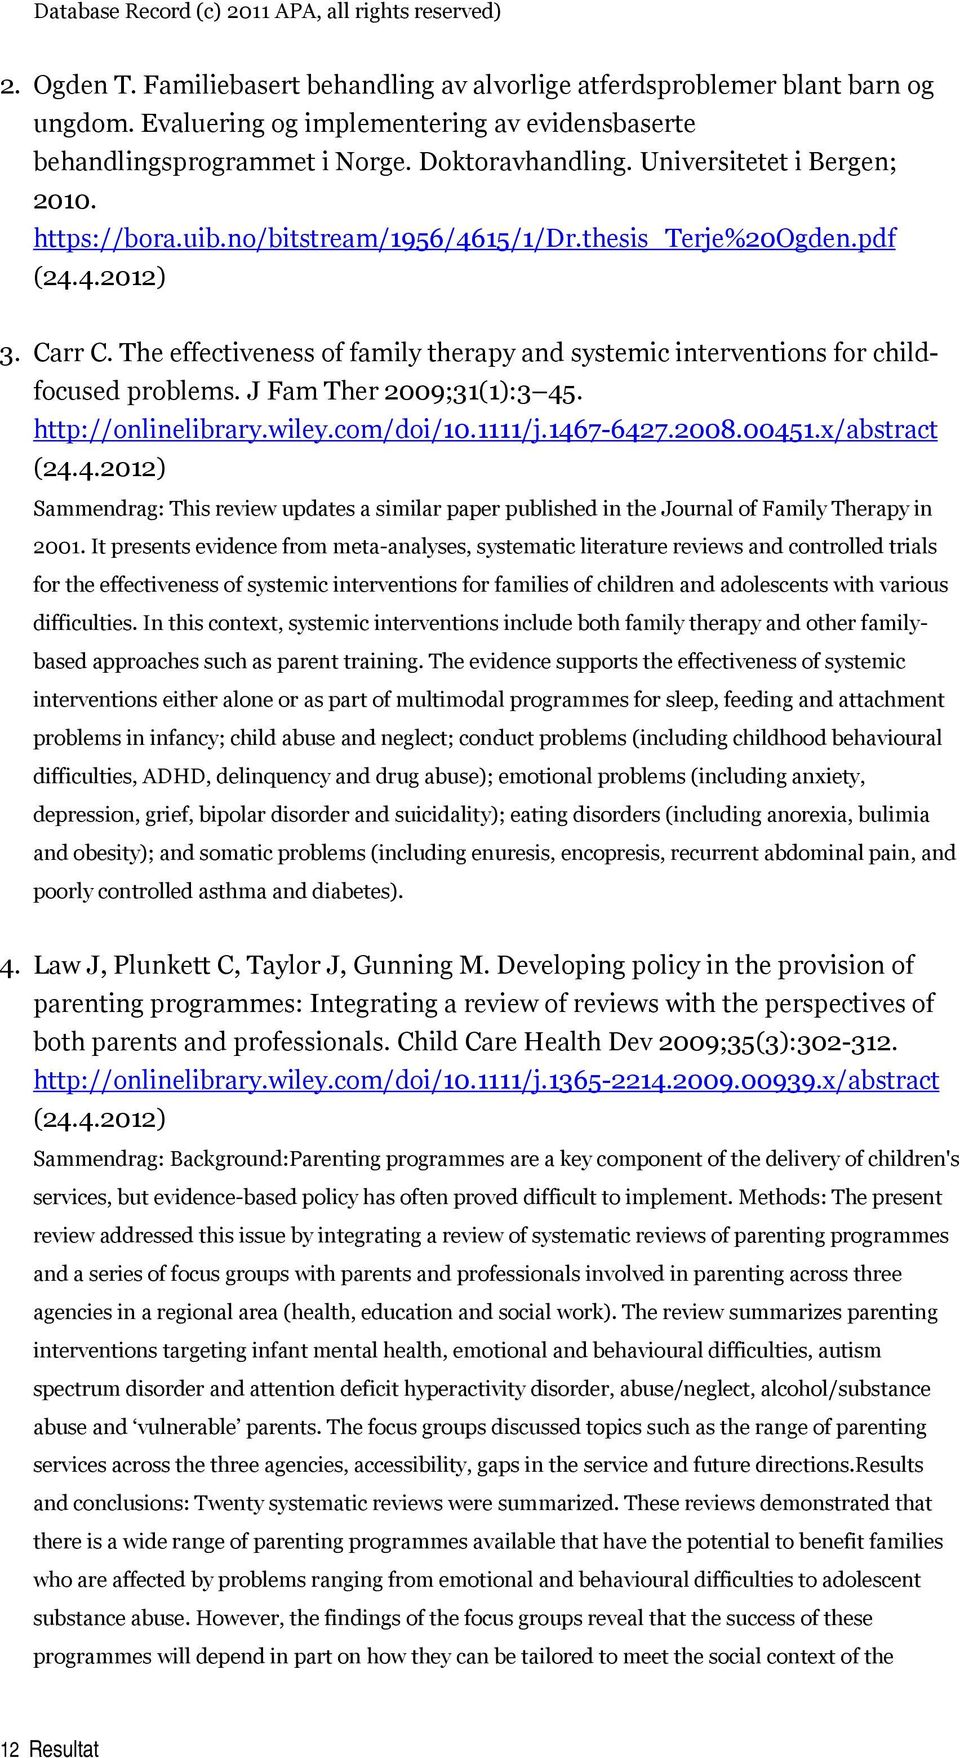 4.2012) 3. Carr C. The effectiveness of family therapy and systemic interventions for childfocused problems. J Fam Ther 2009;31(1):3 45. http://onlinelibrary.wiley.com/doi/10.1111/j.1467-6427.2008.